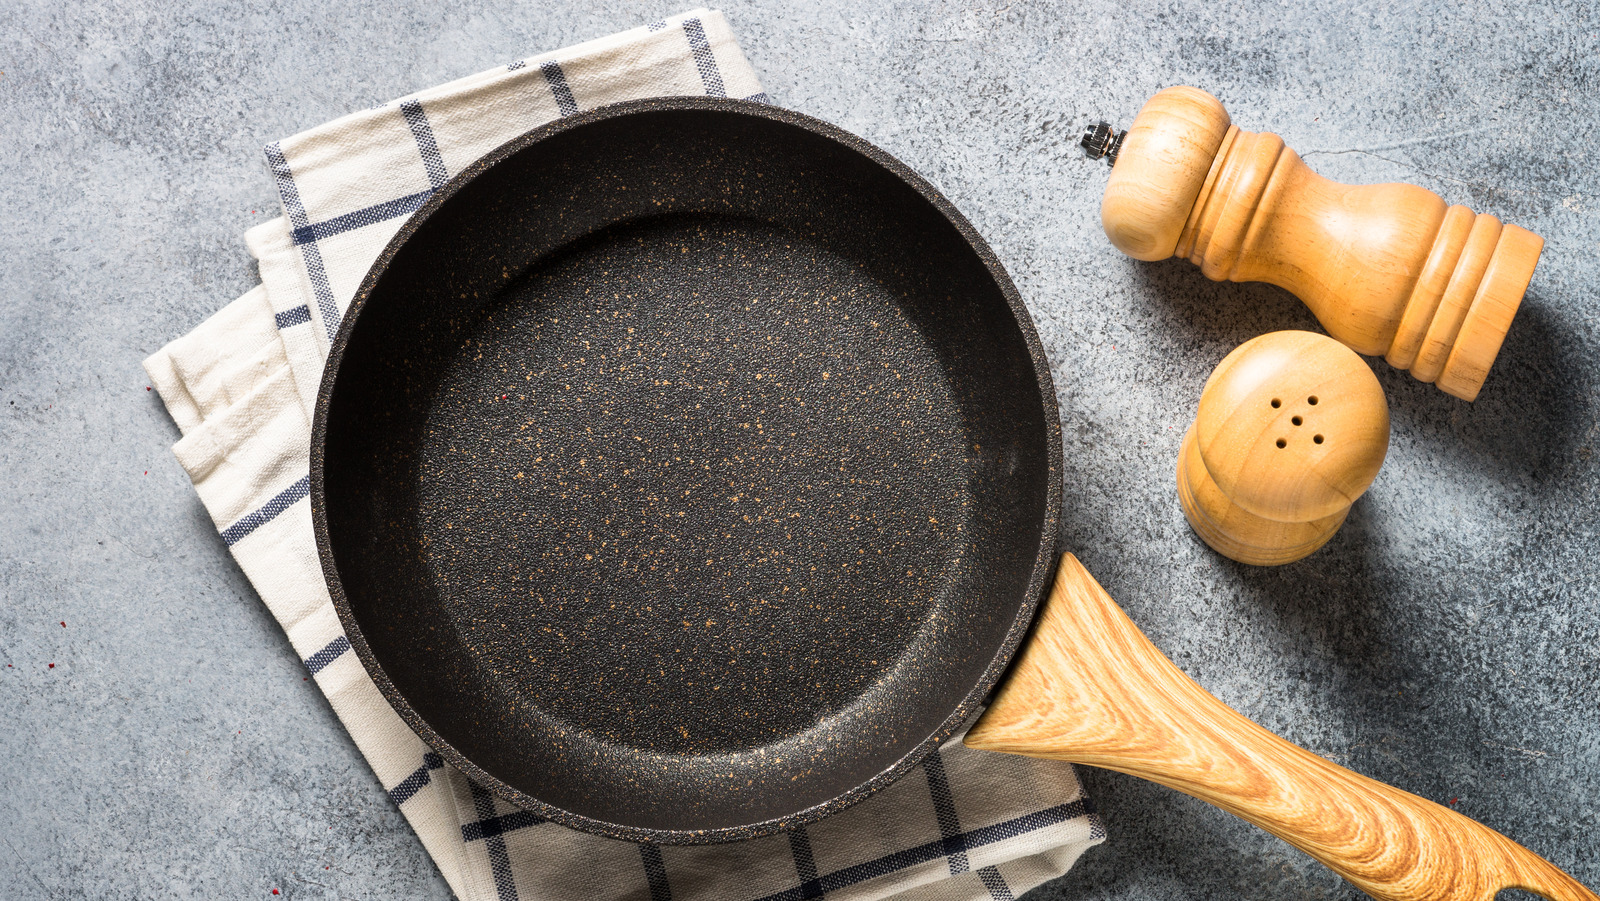 If my nonstick pans are scratched, do I need to throw them out?